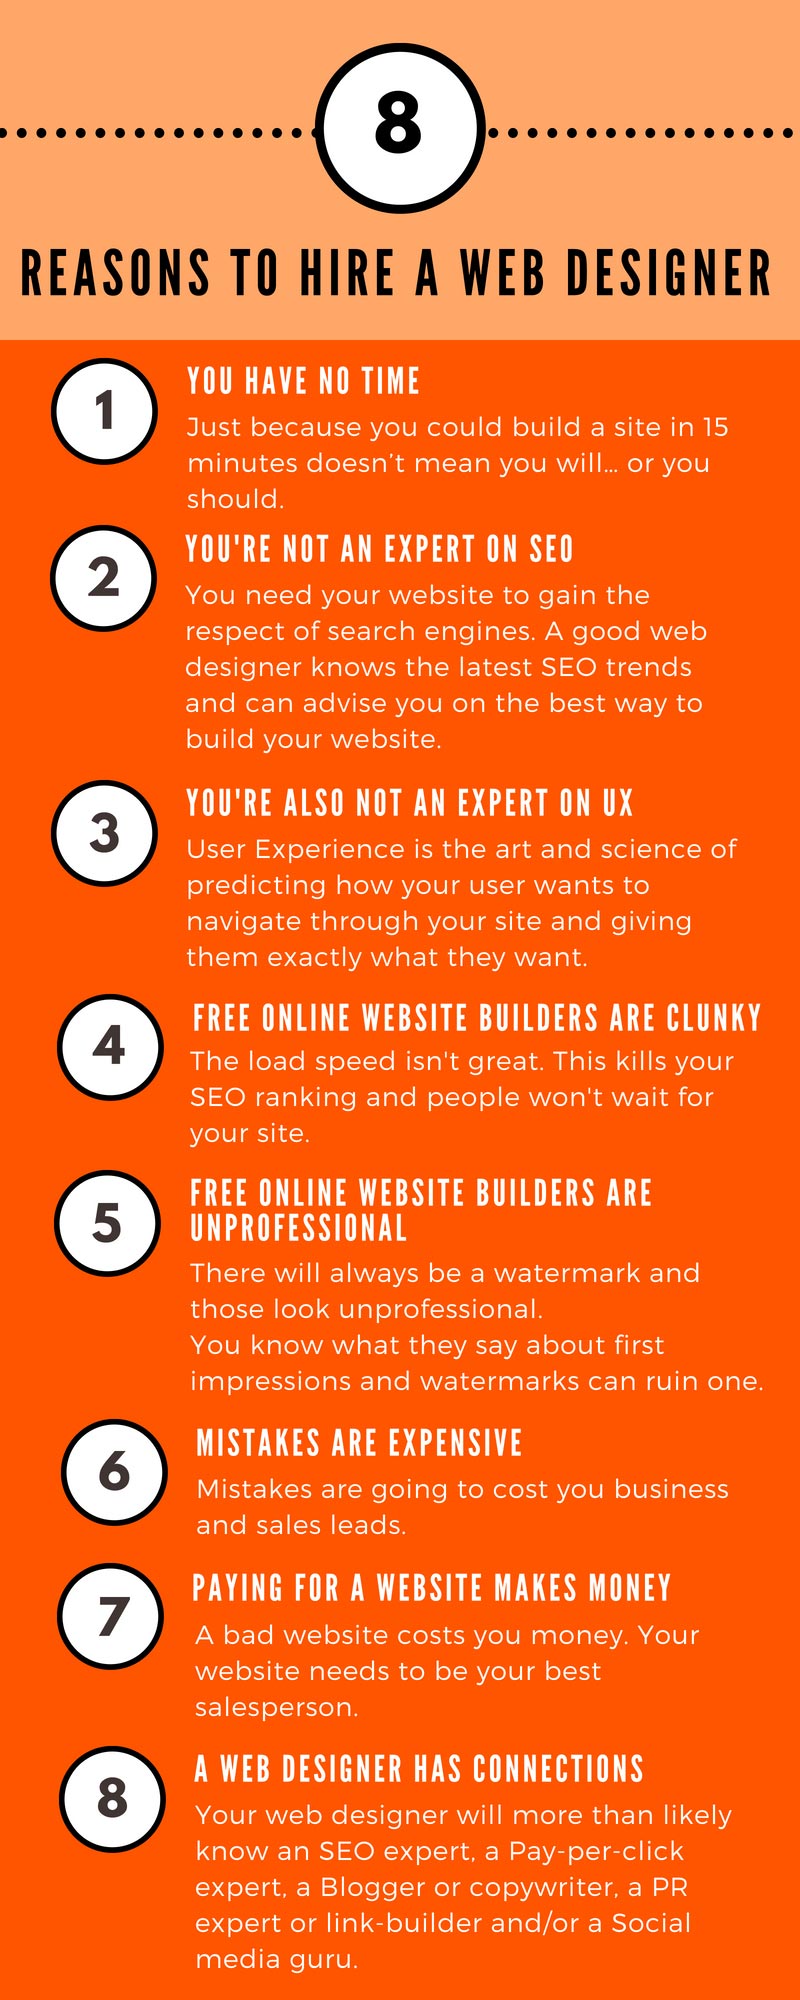 8 REASONS TO HIRE A WEB DESIGNER